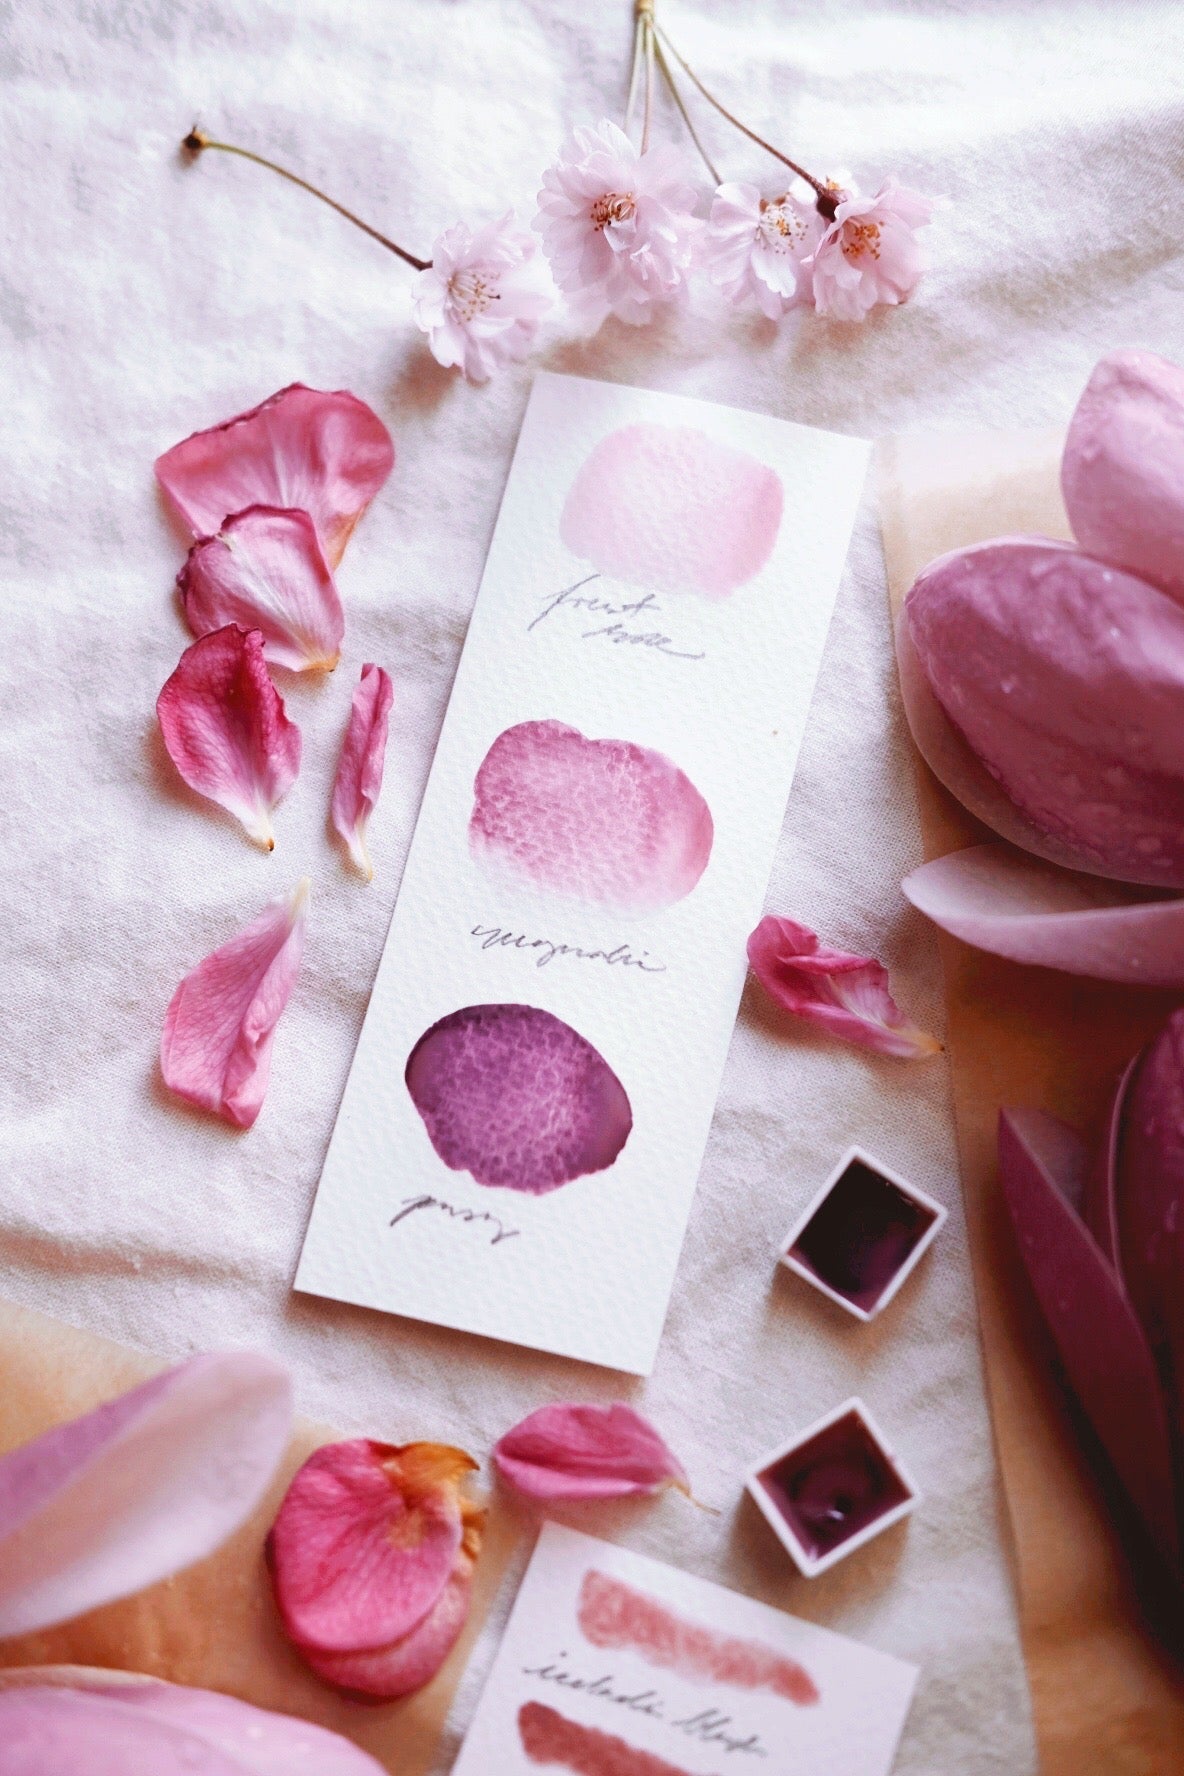 RESERVE for Yasmine + Pink Blossom + Limited edition gemstone watercolor palette